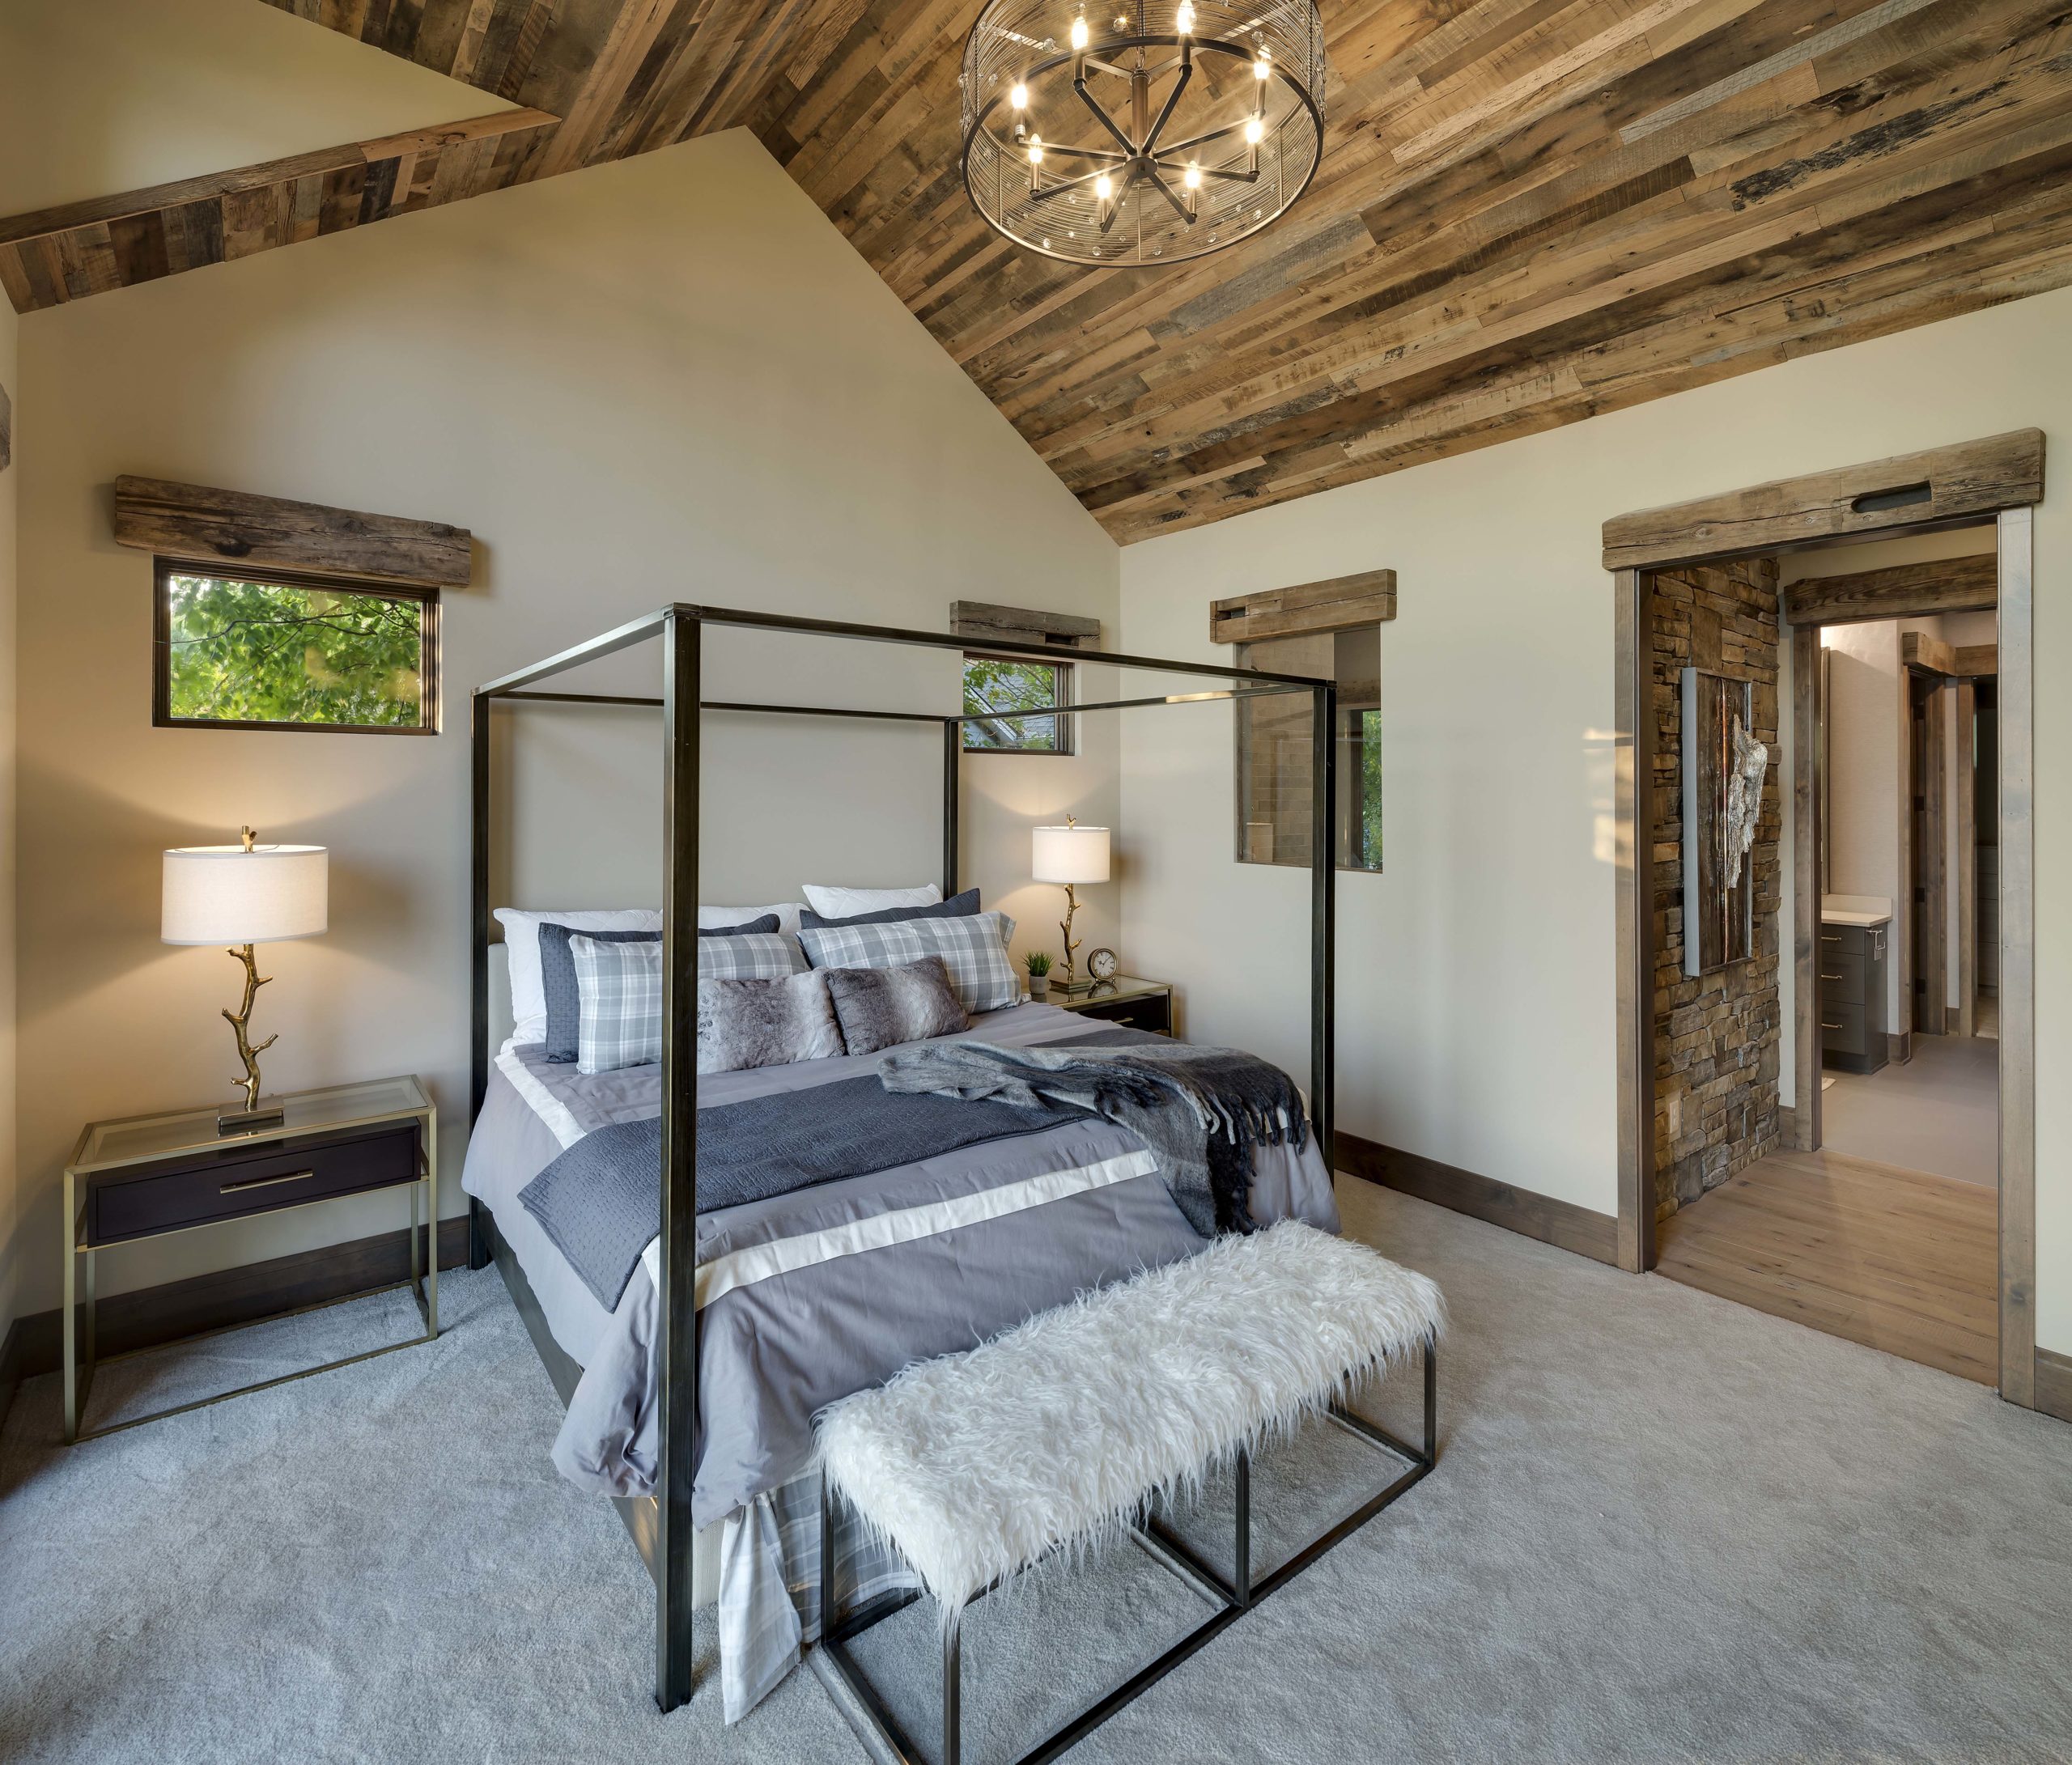 A bedroom with a wood ceiling and a bed.